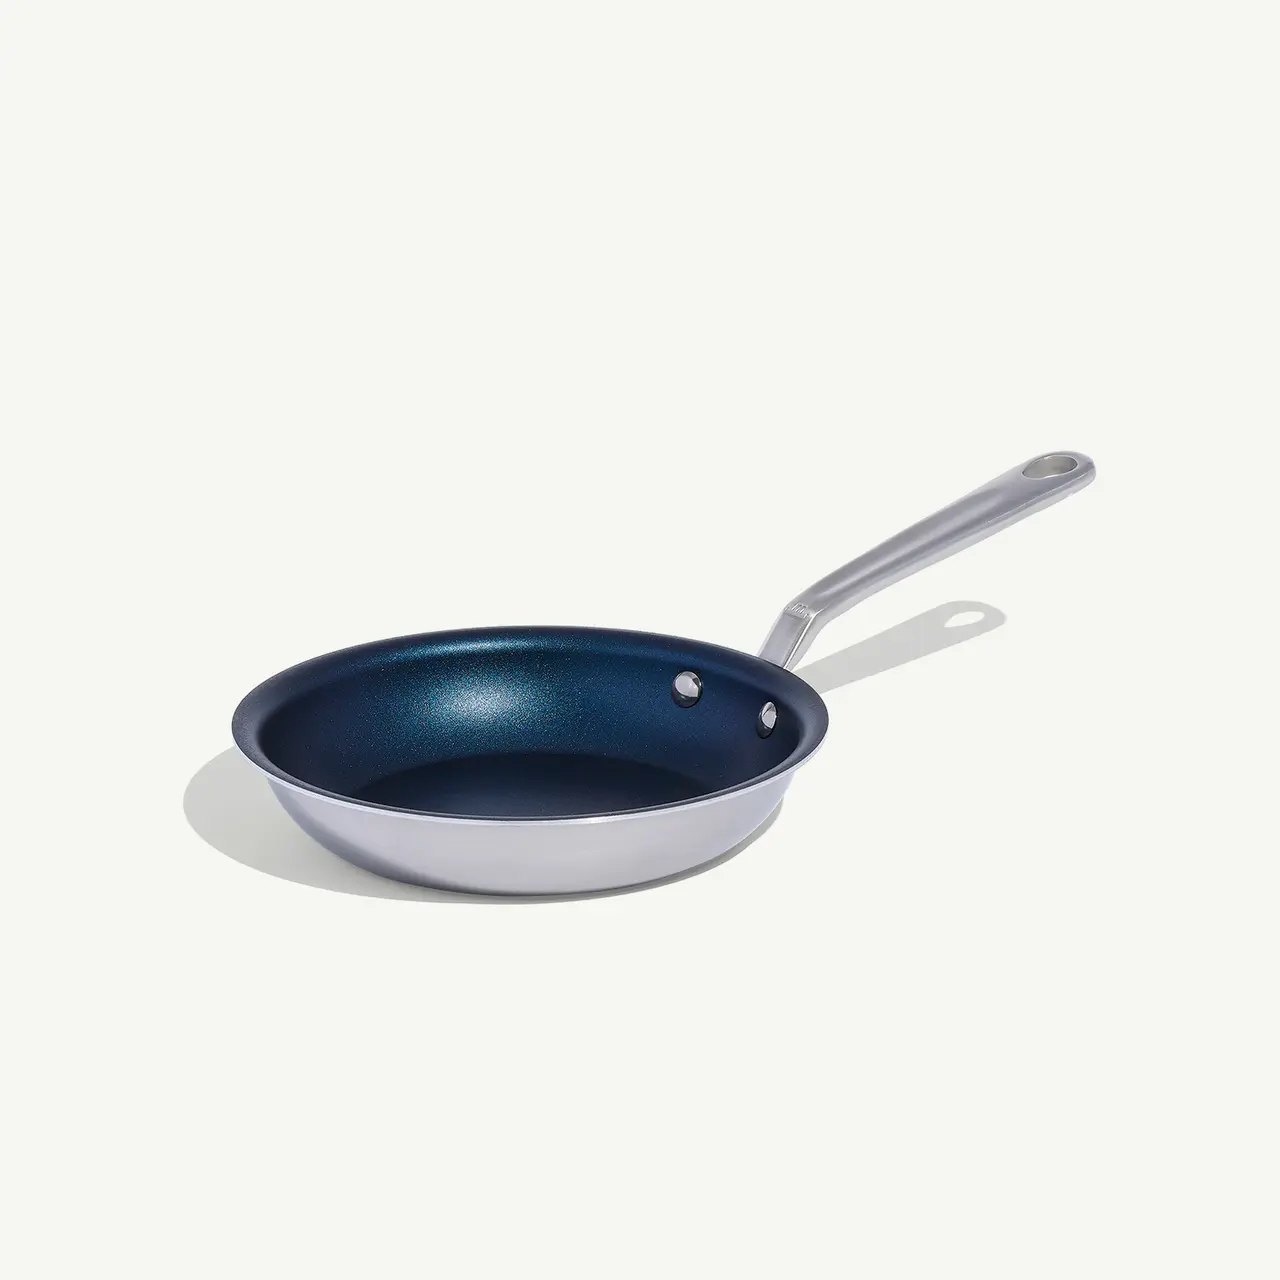 A non-stick frying pan with a silver handle is placed against a white background.